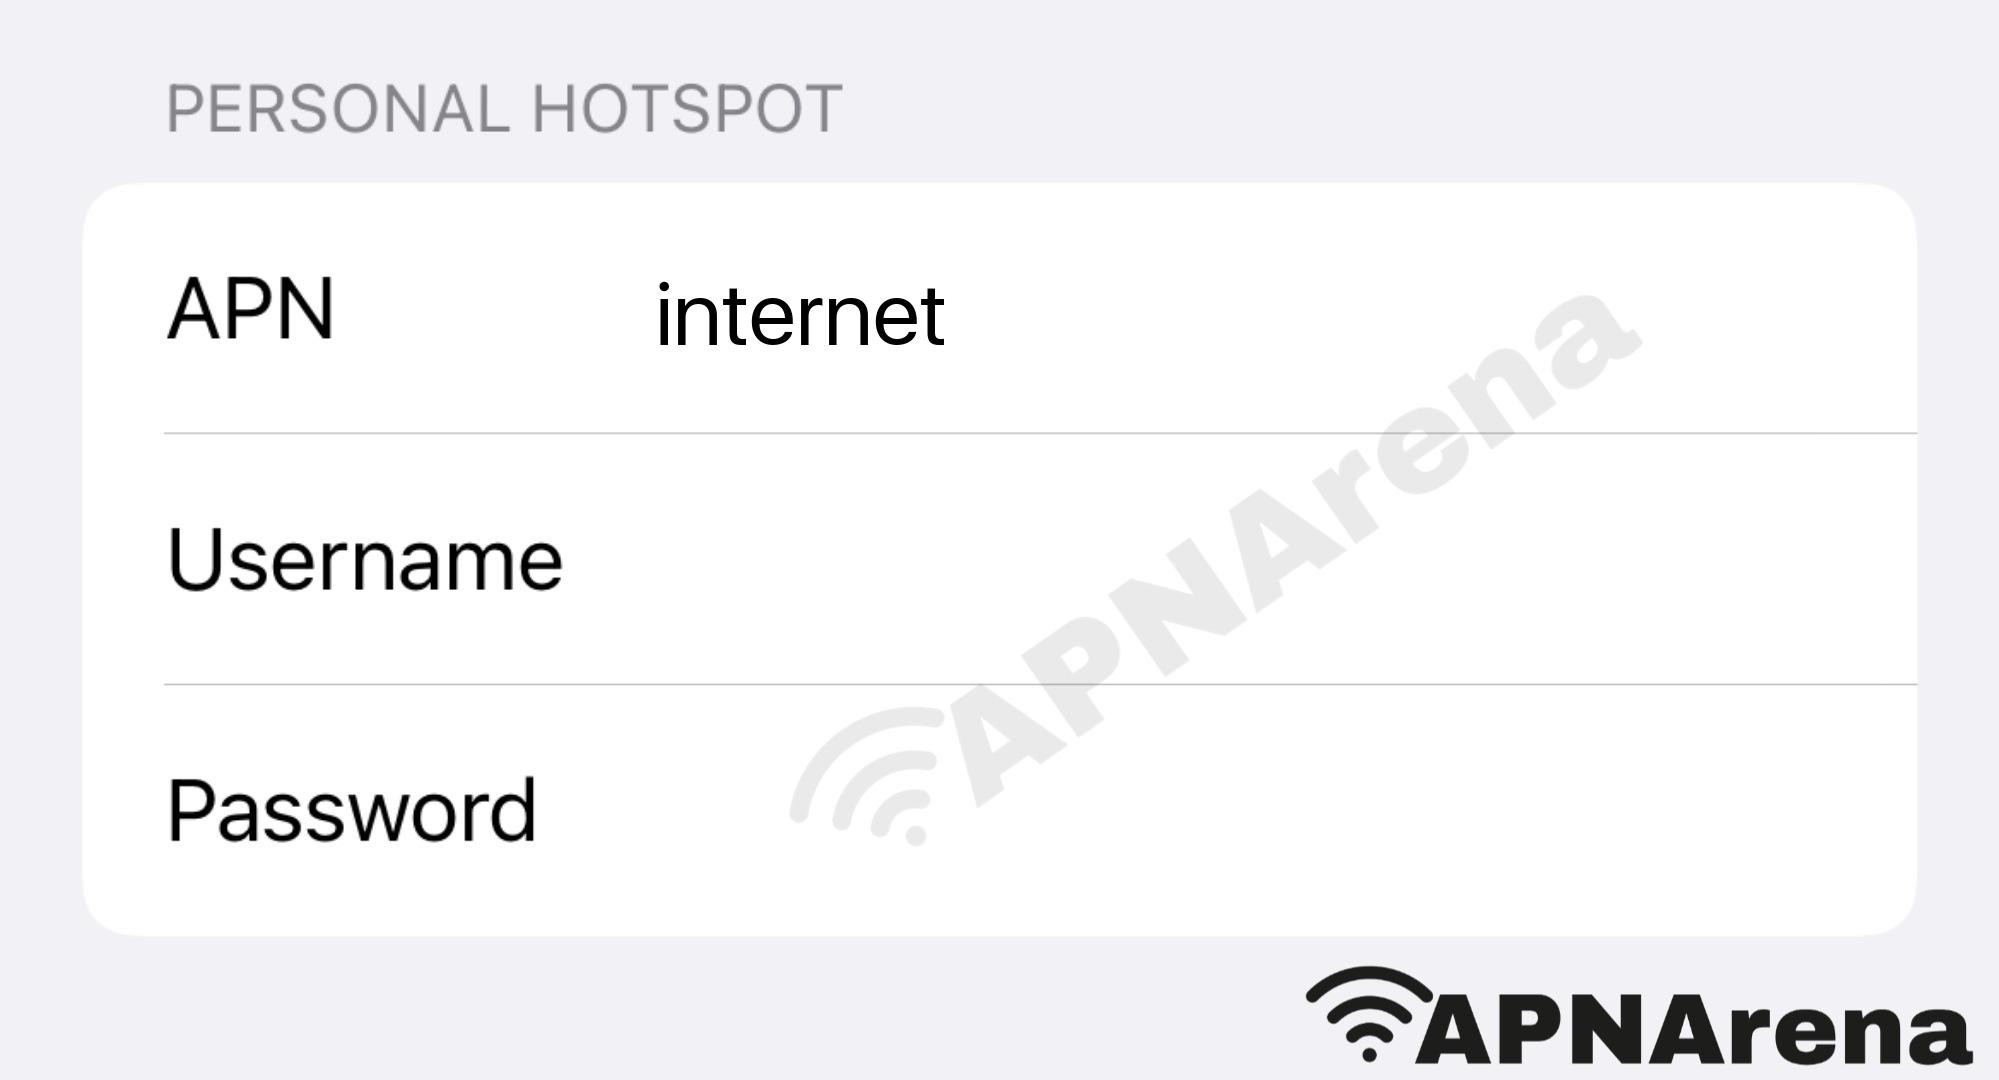 Wind Telecom Personal Hotspot Settings for iPhone